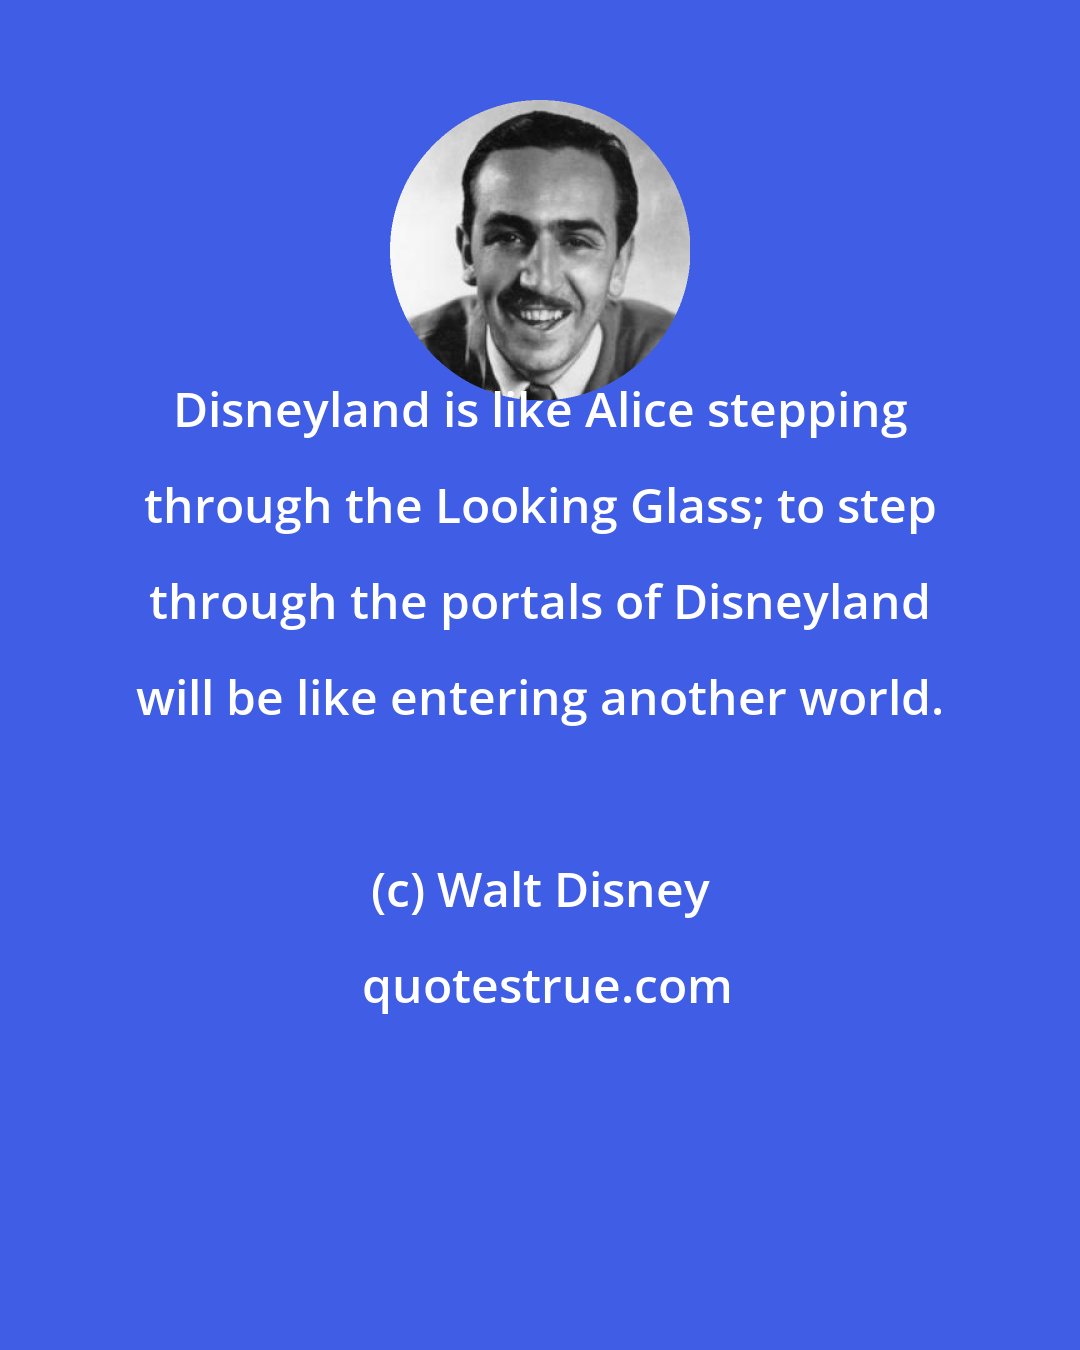 Walt Disney: Disneyland is like Alice stepping through the Looking Glass; to step through the portals of Disneyland will be like entering another world.